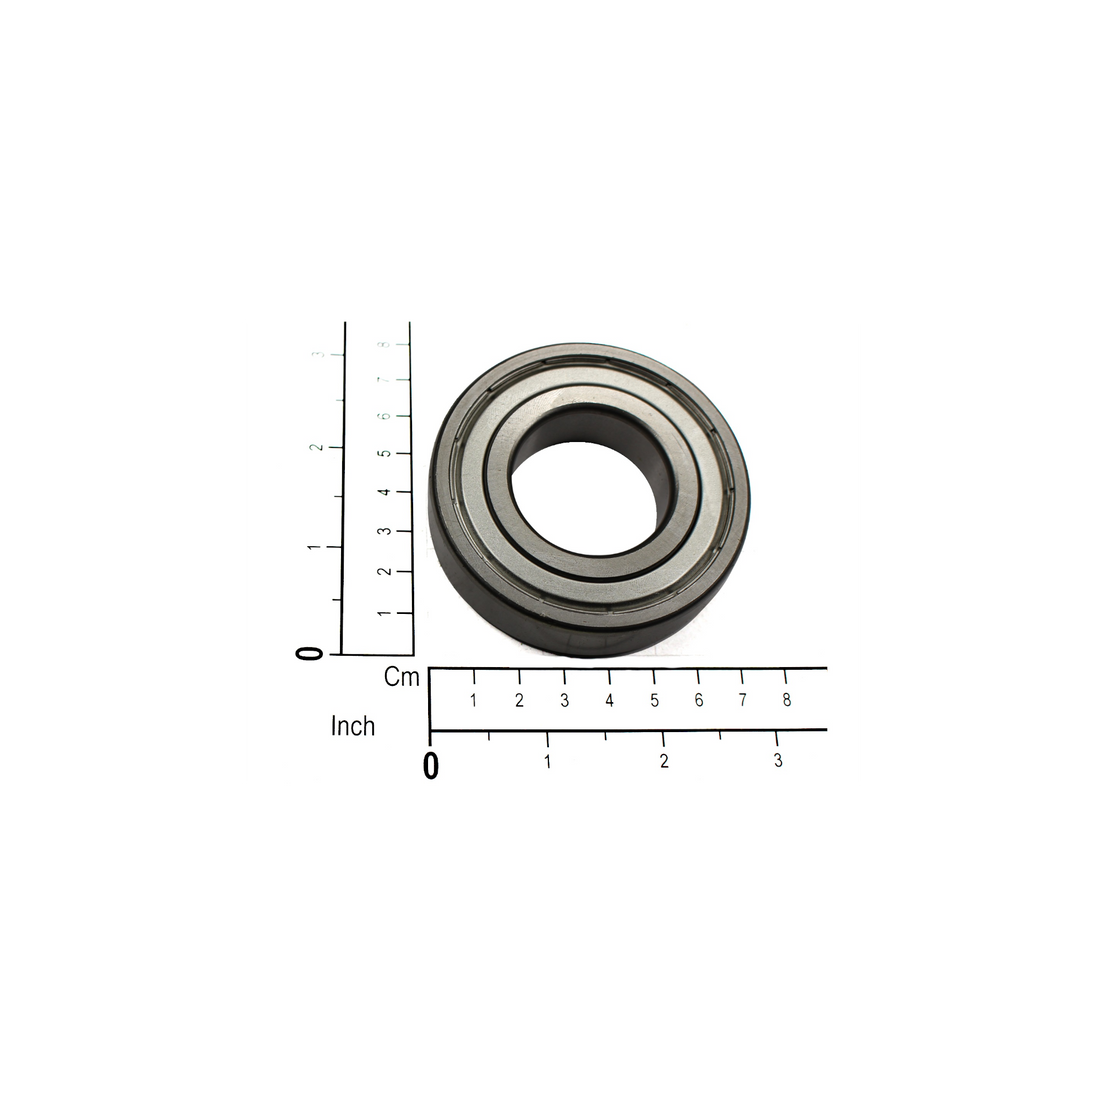 R&M Parts - Deep Groove Ball Bearing, Part Number: 50001324